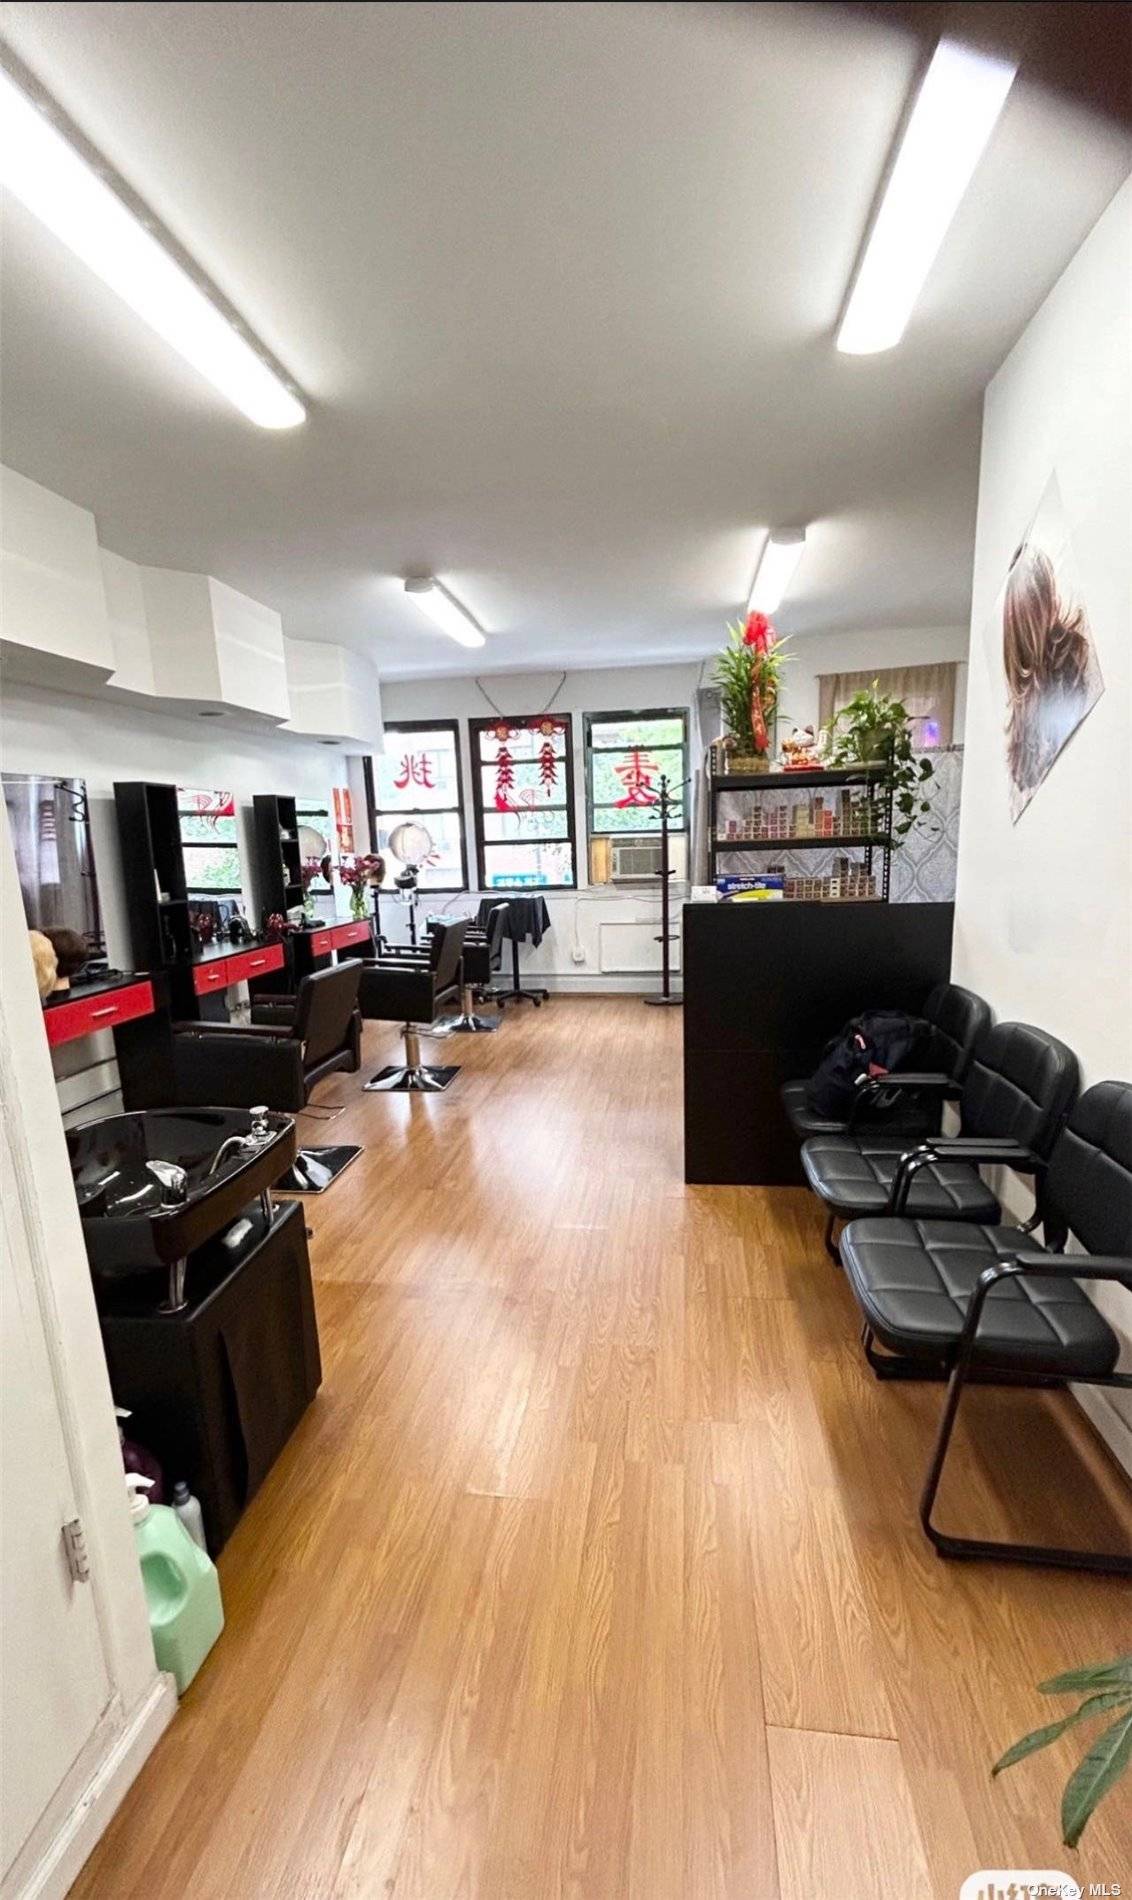 Established business located in a very nice and convenient area.